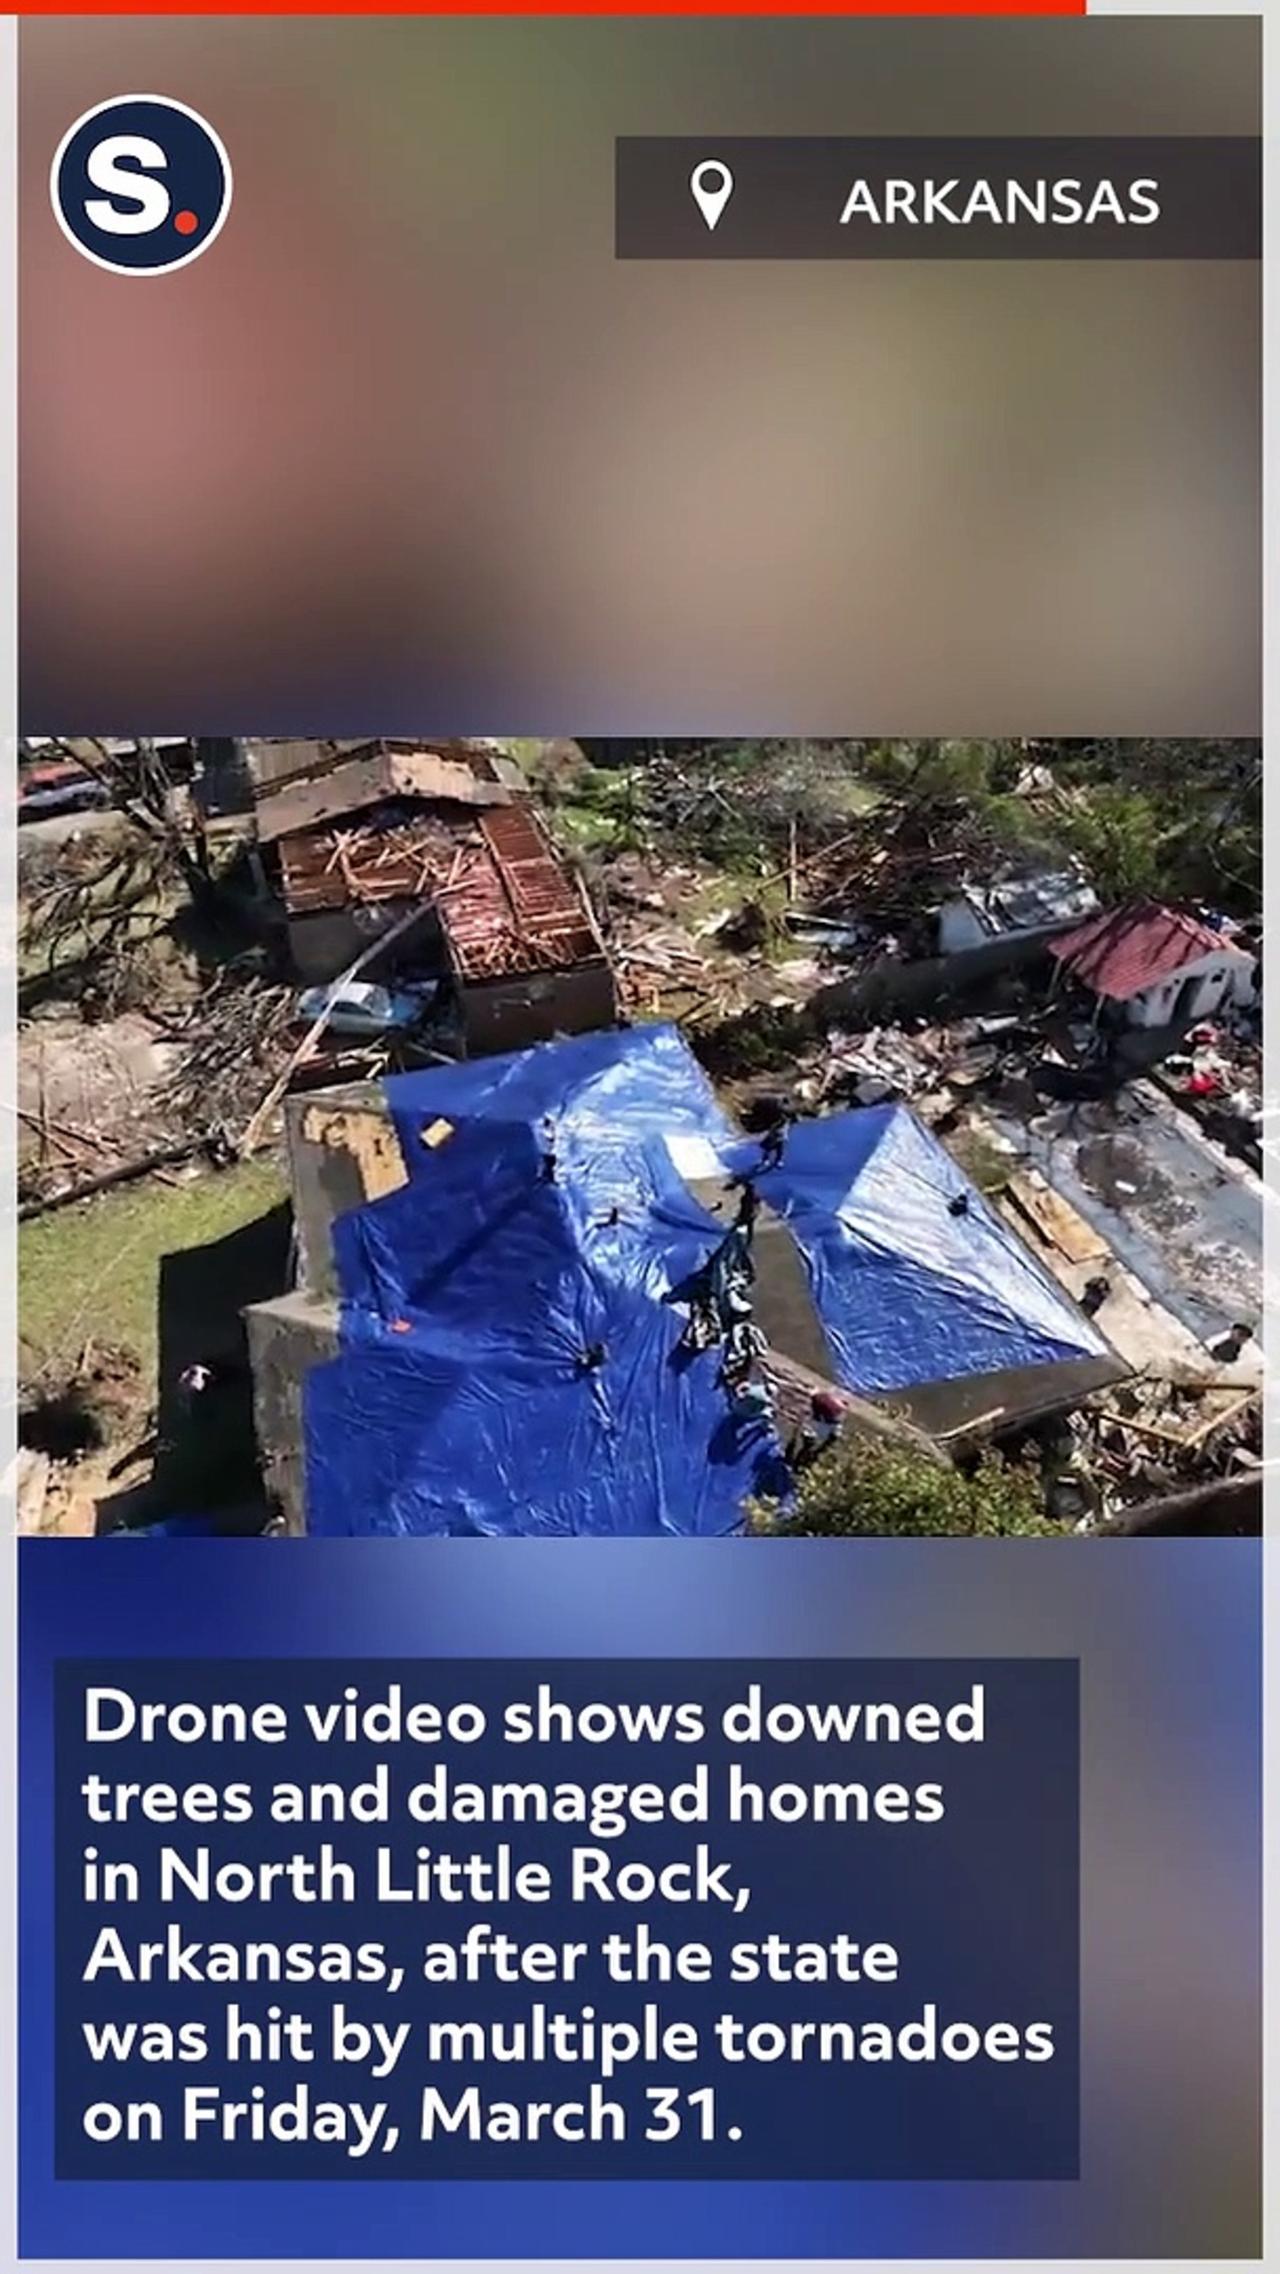 Drone Video Shows Destruction From Tornado in North Little Rock